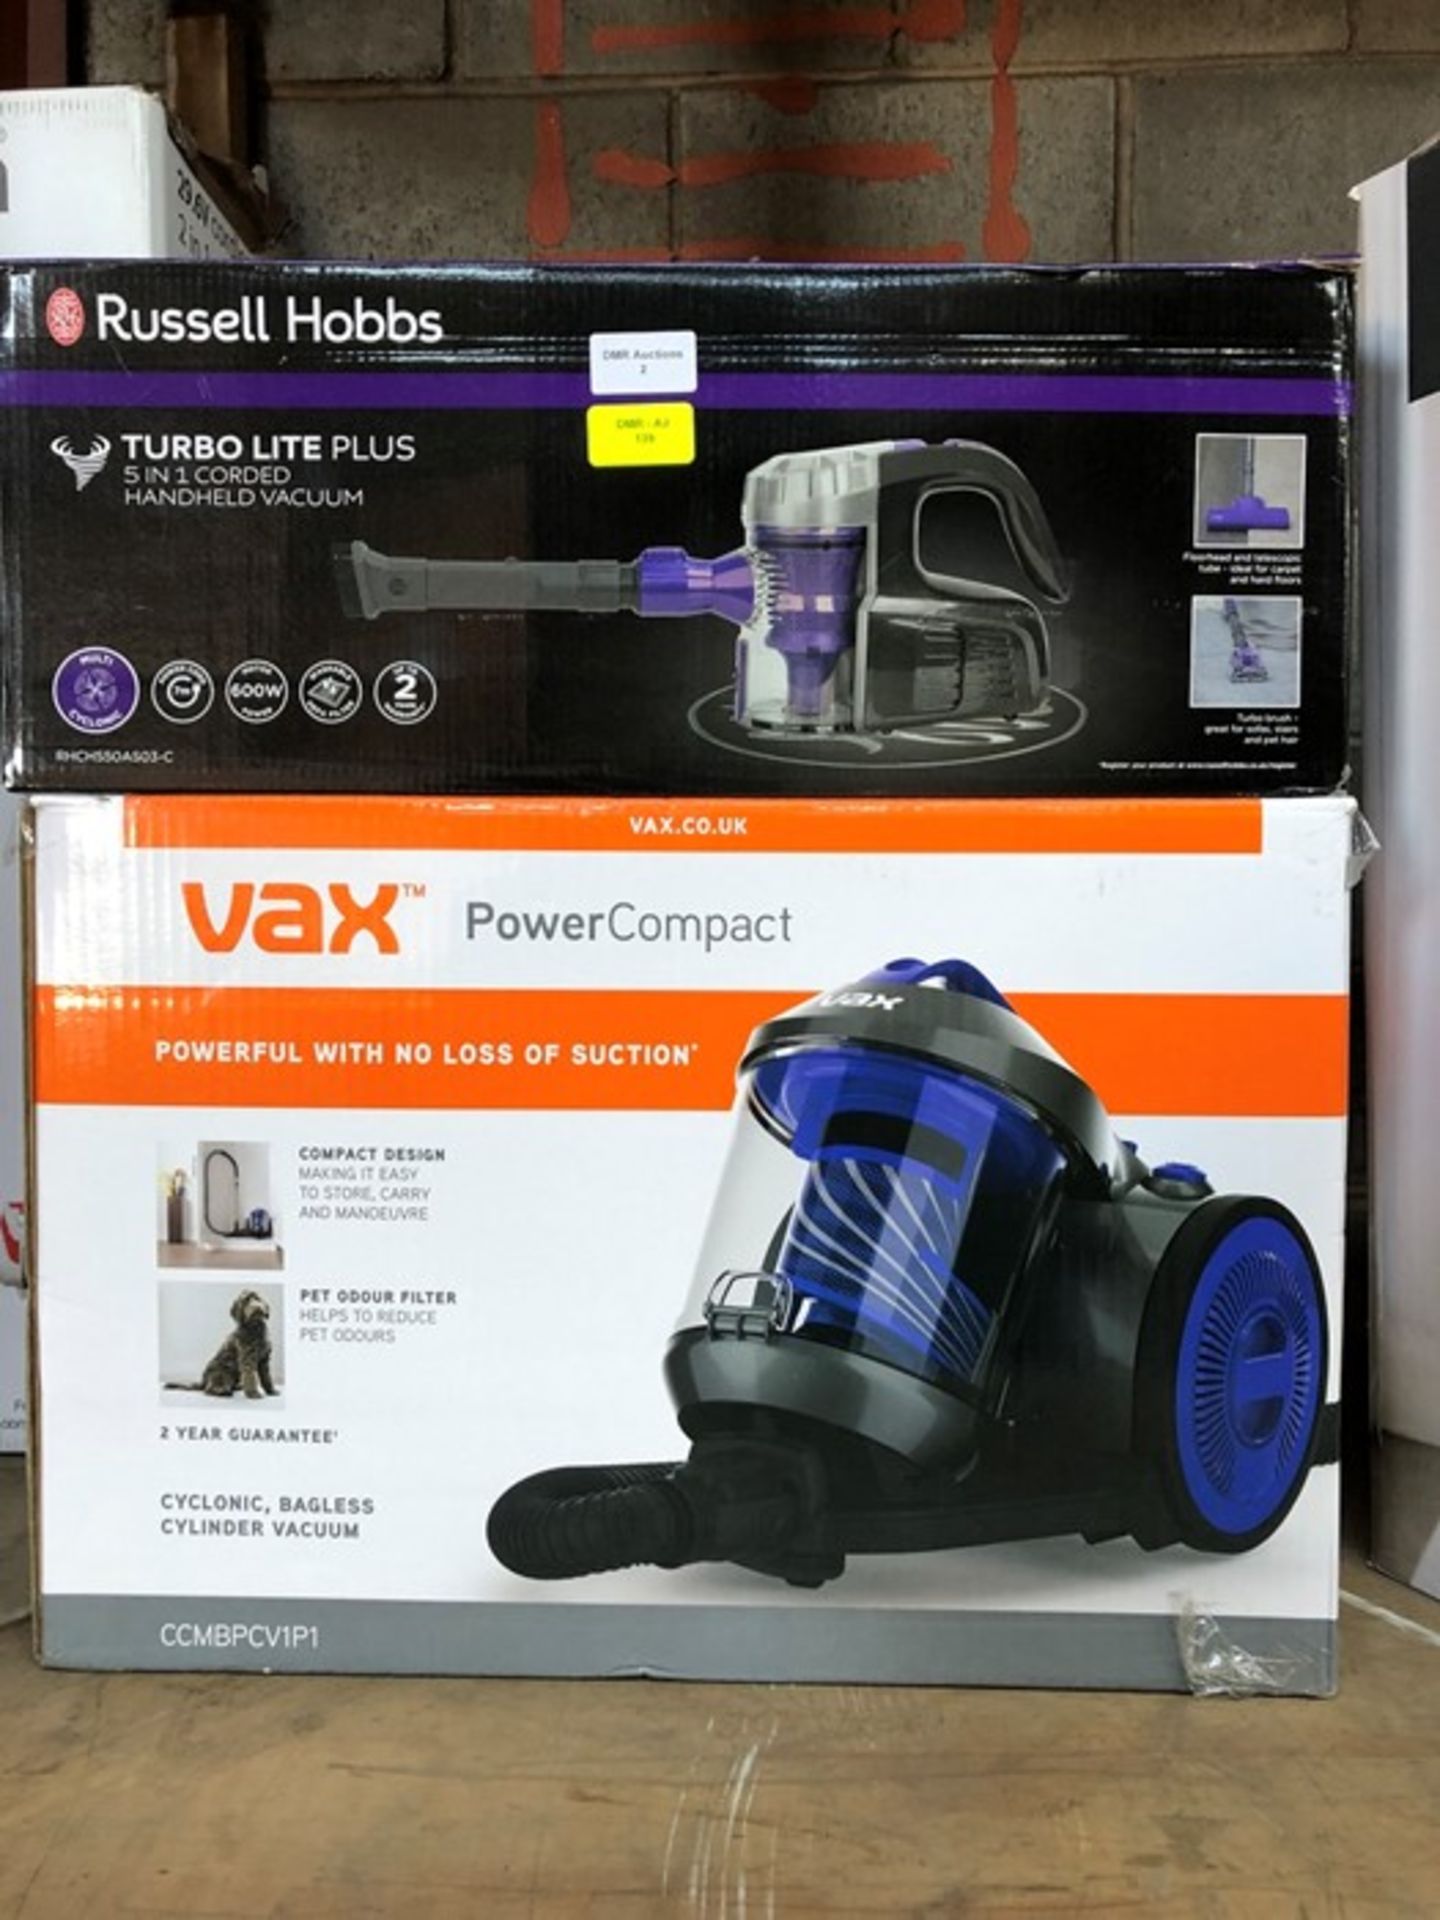 1 RUSSELL HOBBS TURBO LITE PLUS AND 1 VAX POWER COMPACT PUBLIC VIEWING AVAILABLE & HIGHLY